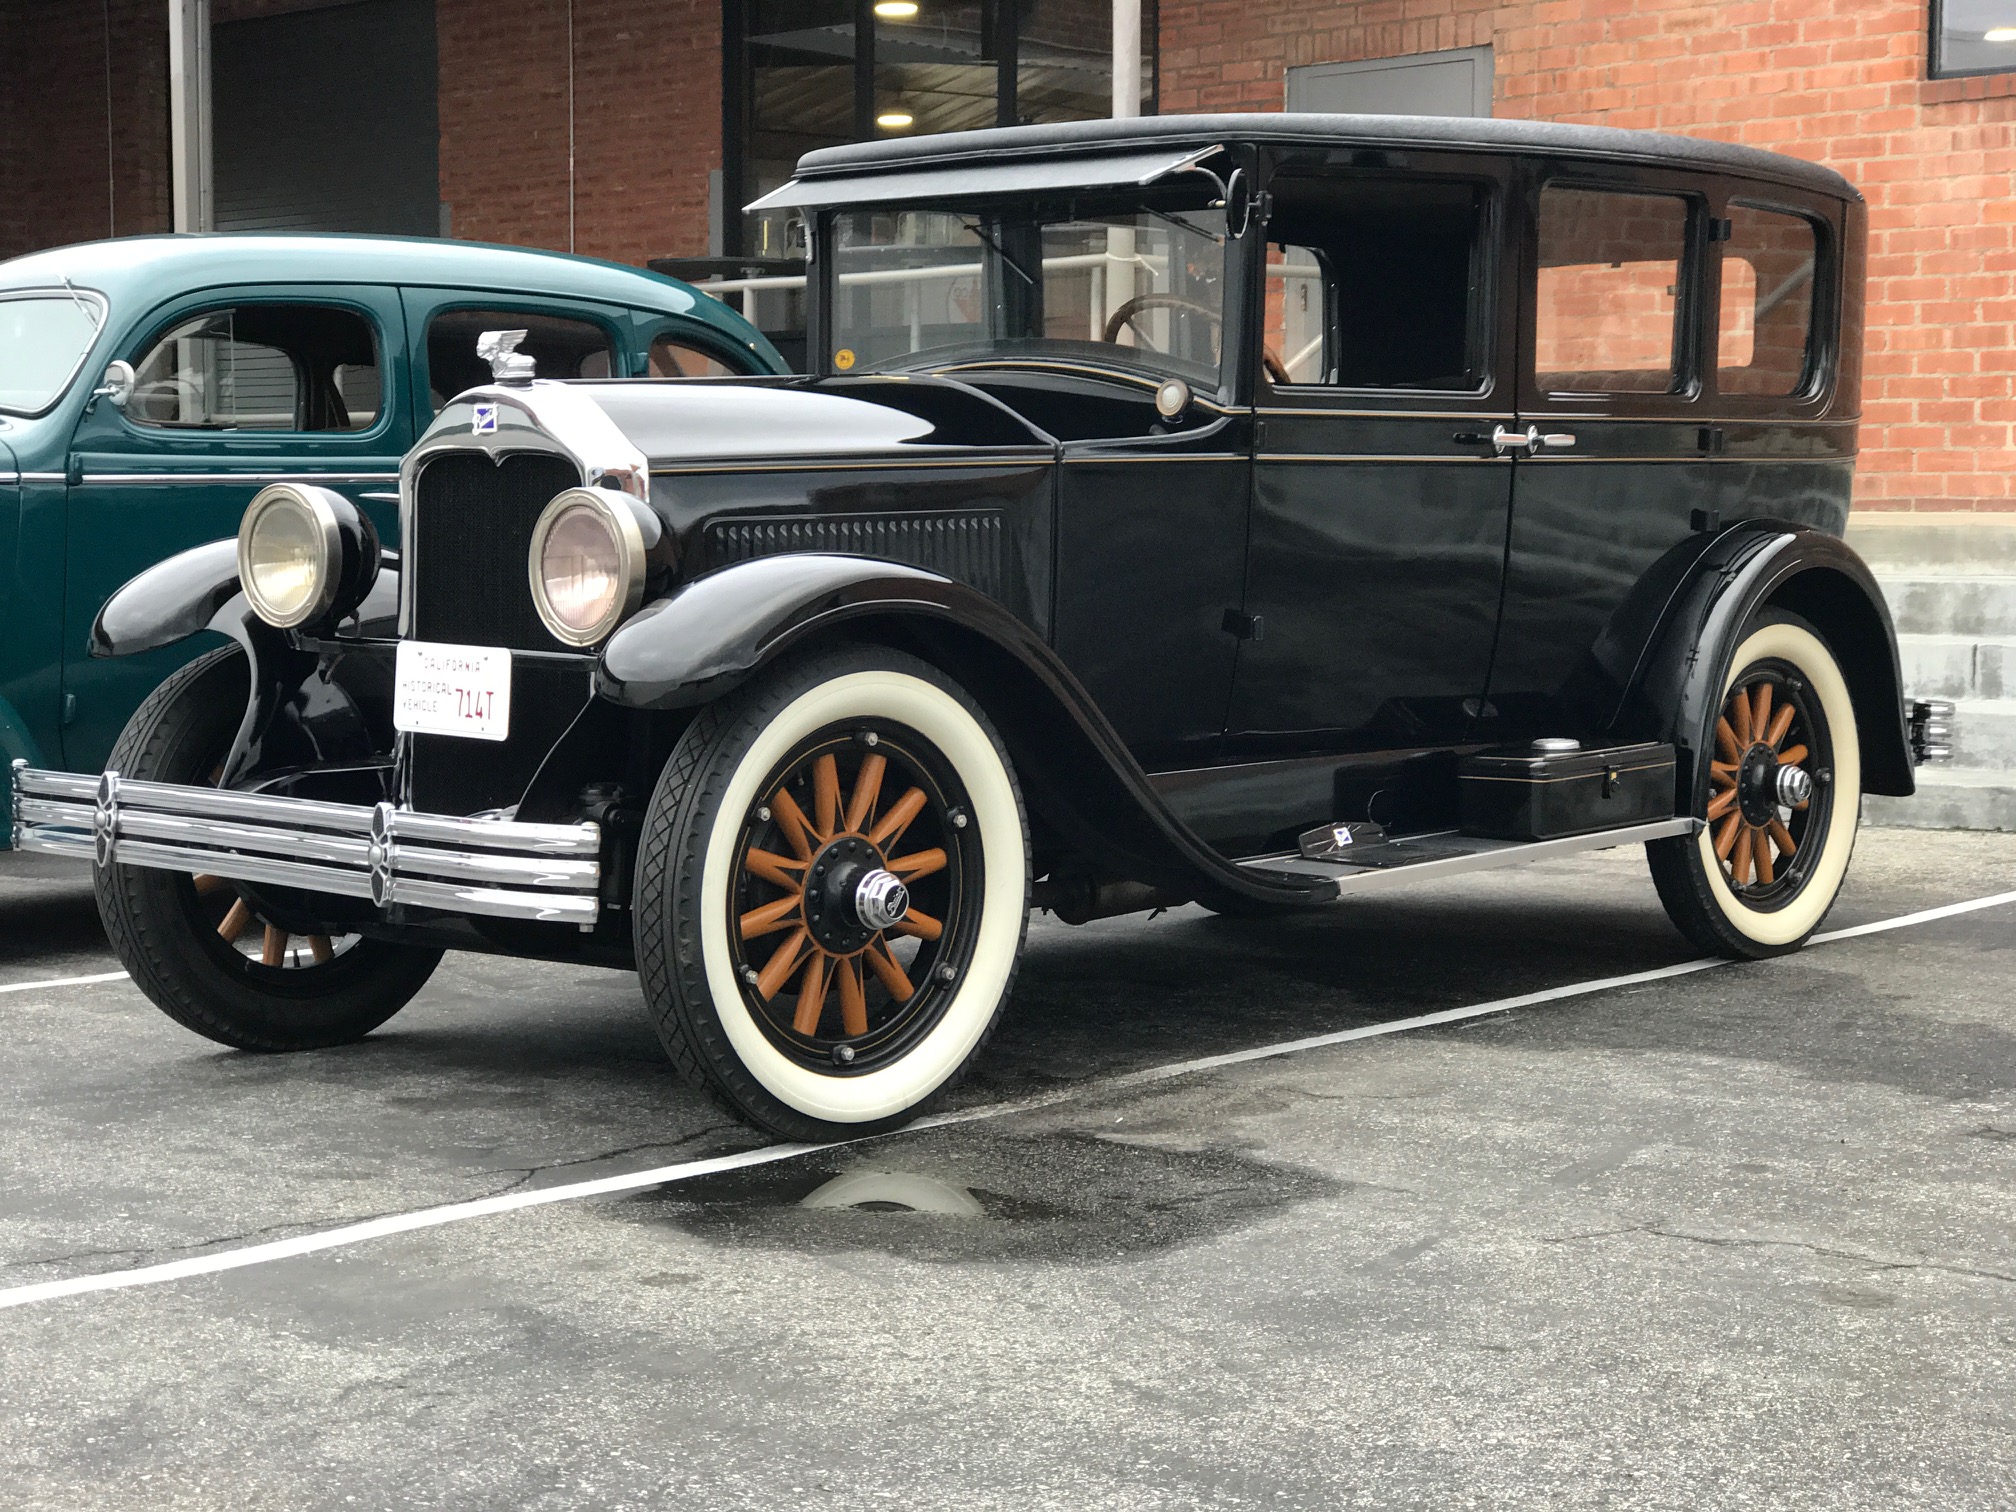 1928 Buick for rent